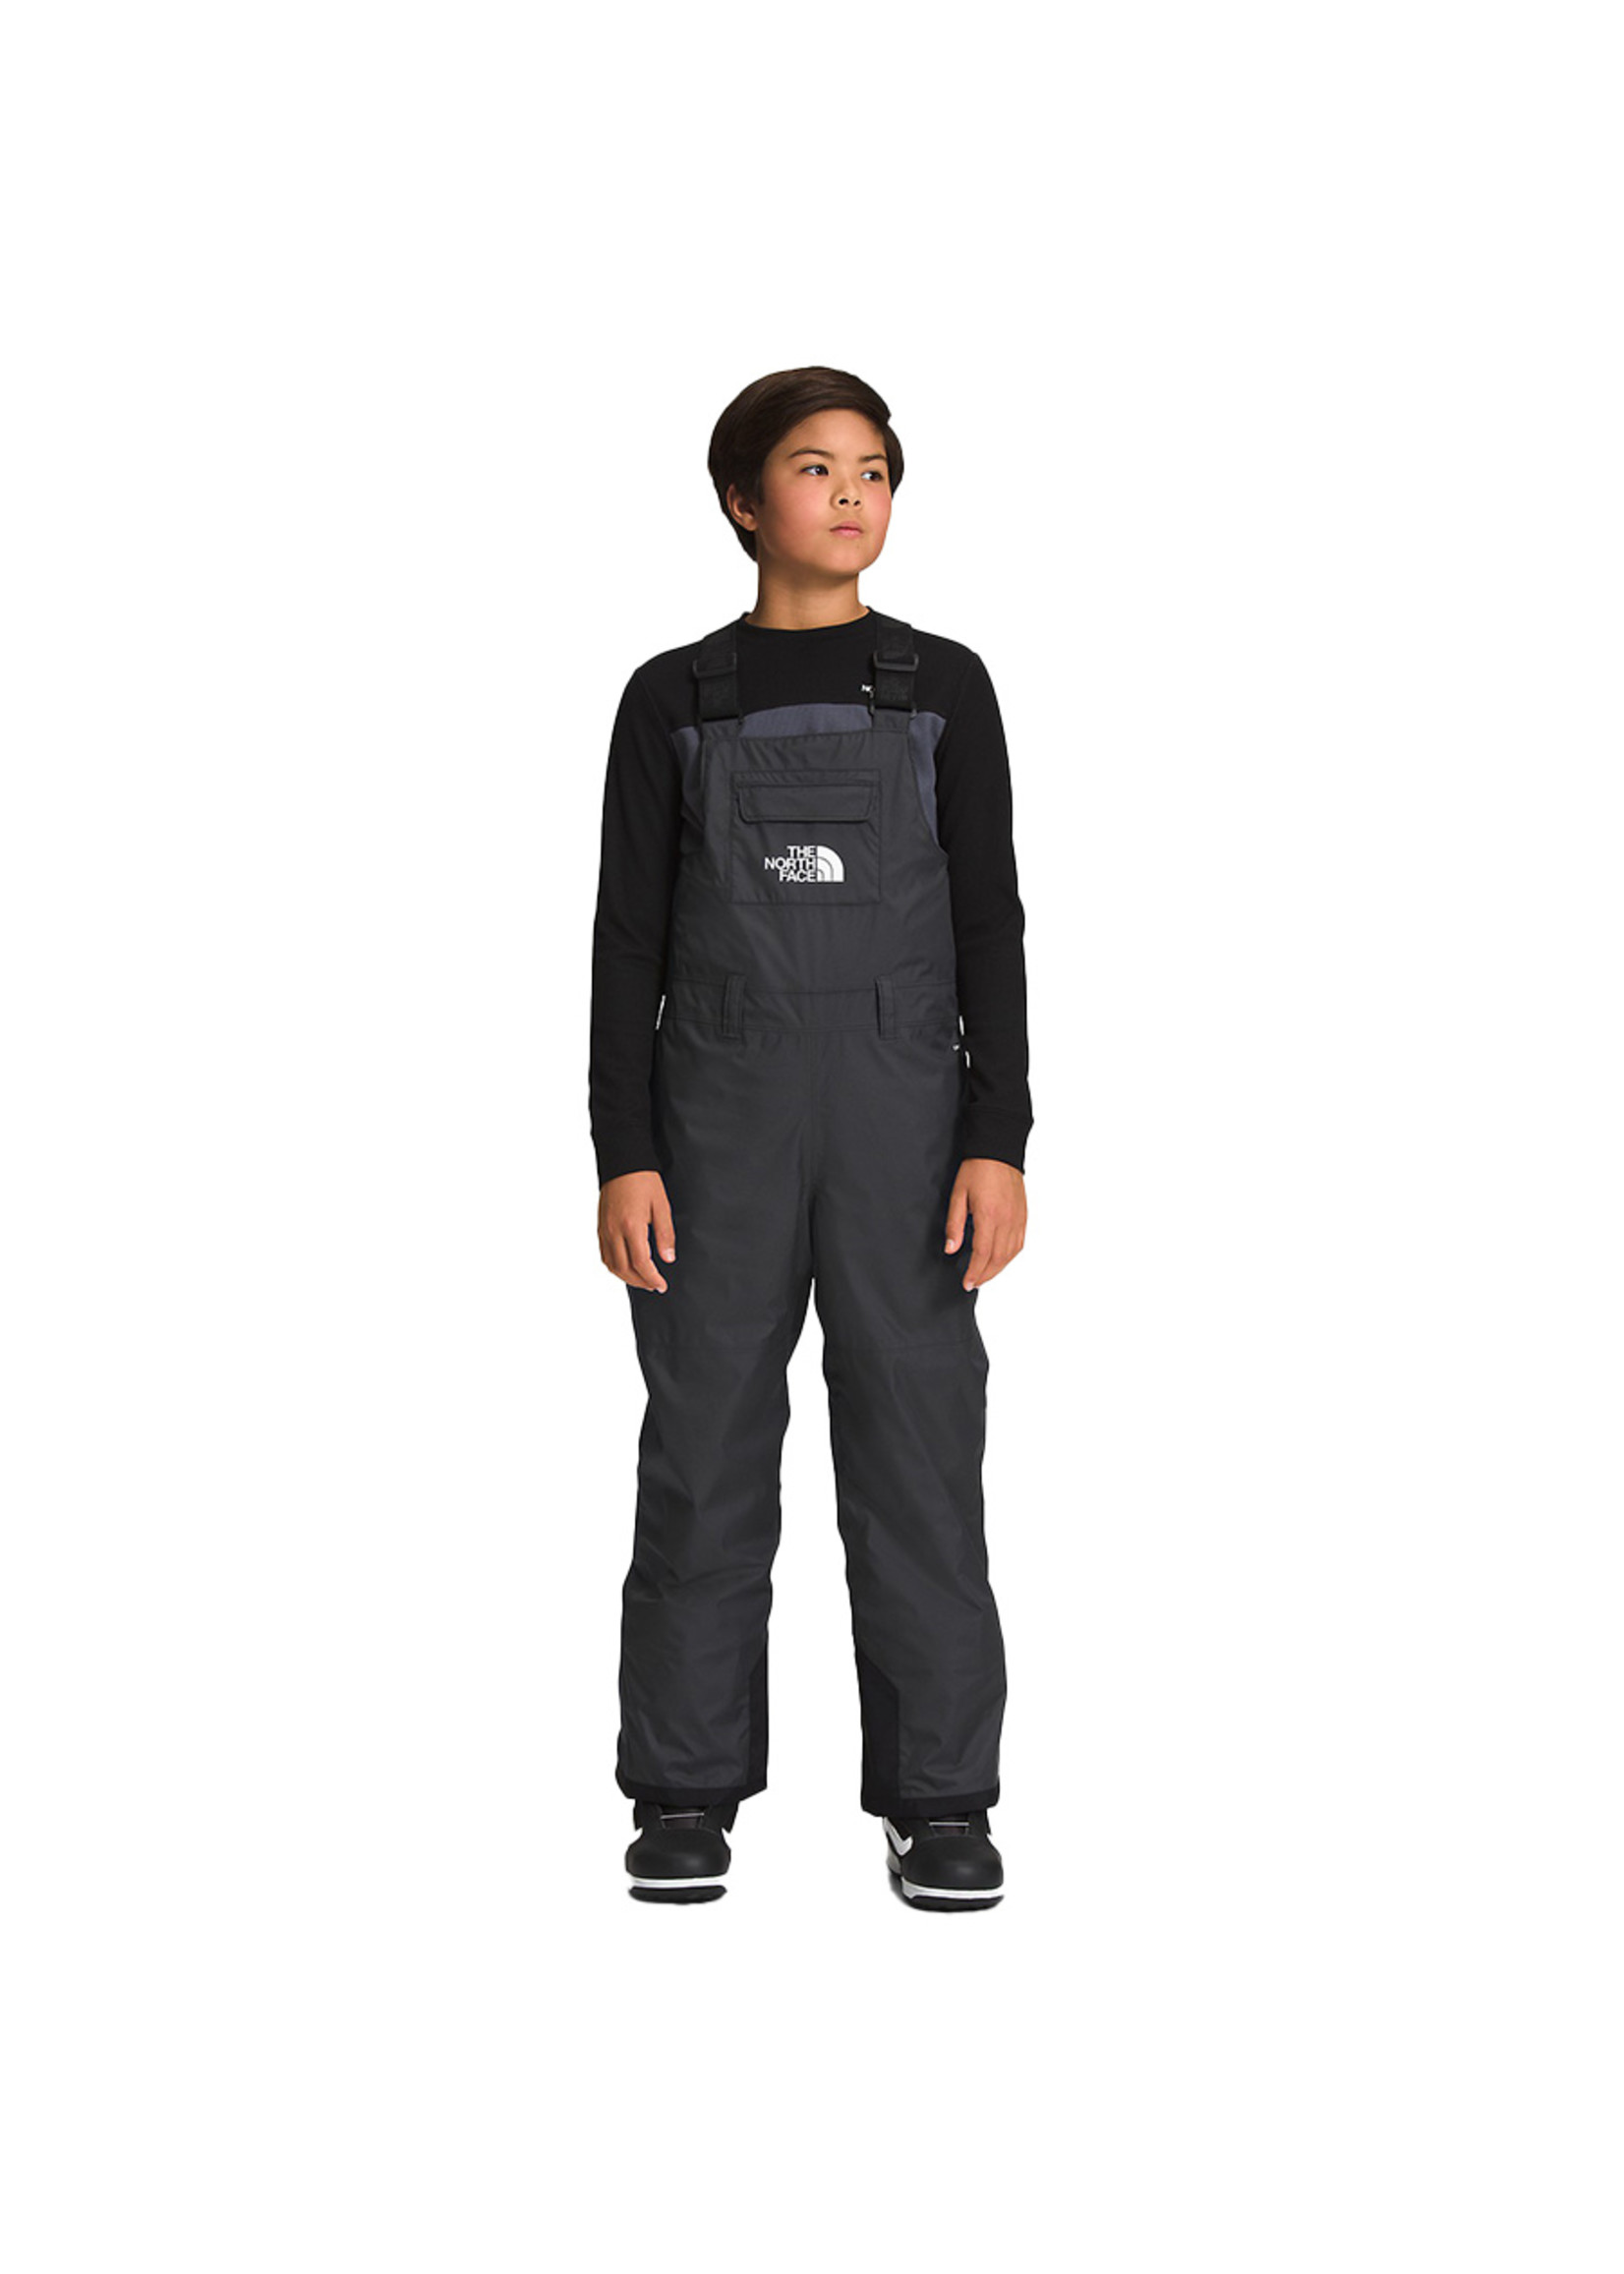 THE NORTH FACE Salopette isolée FREEDOM (Enfant)